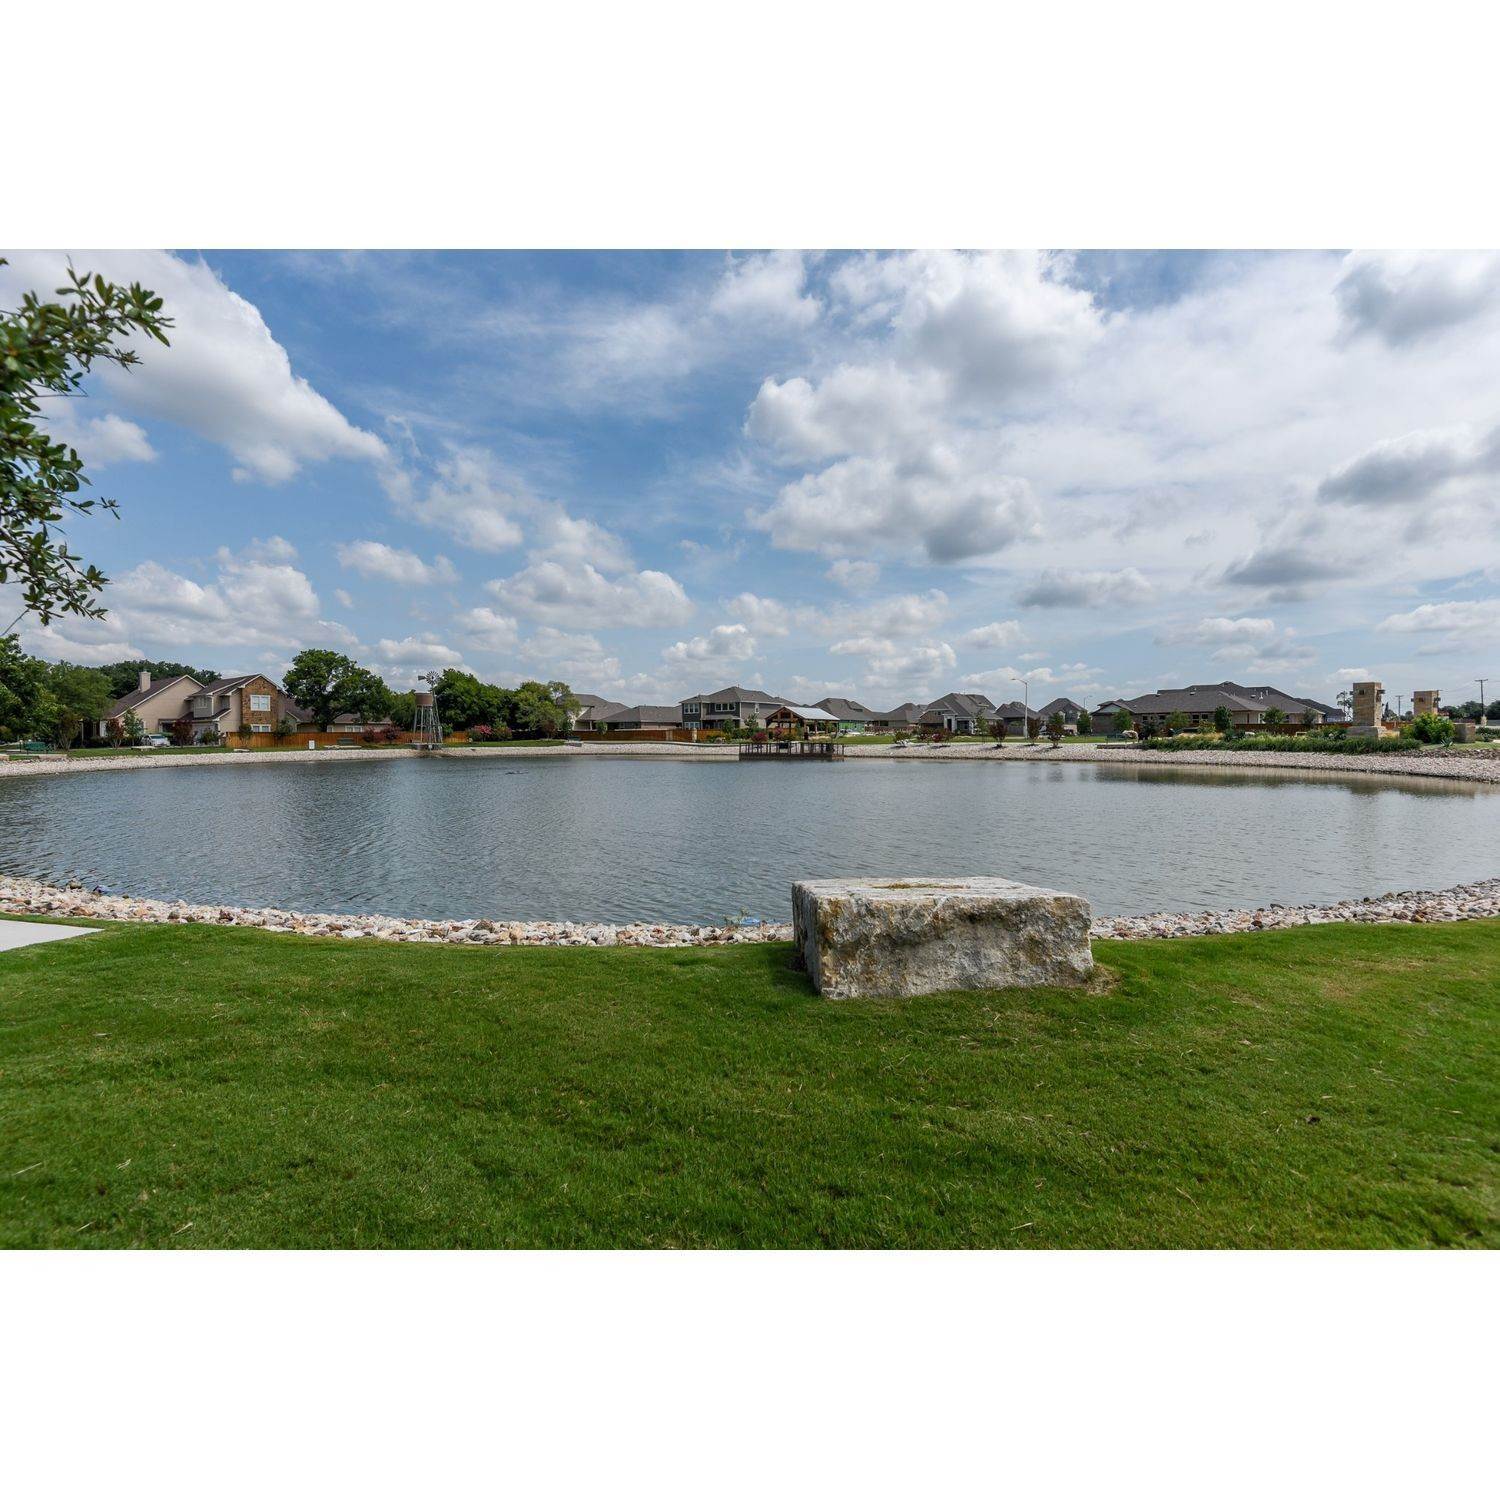 18. Wasser Ranch building at 917 Rench, New Braunfels, TX 78130